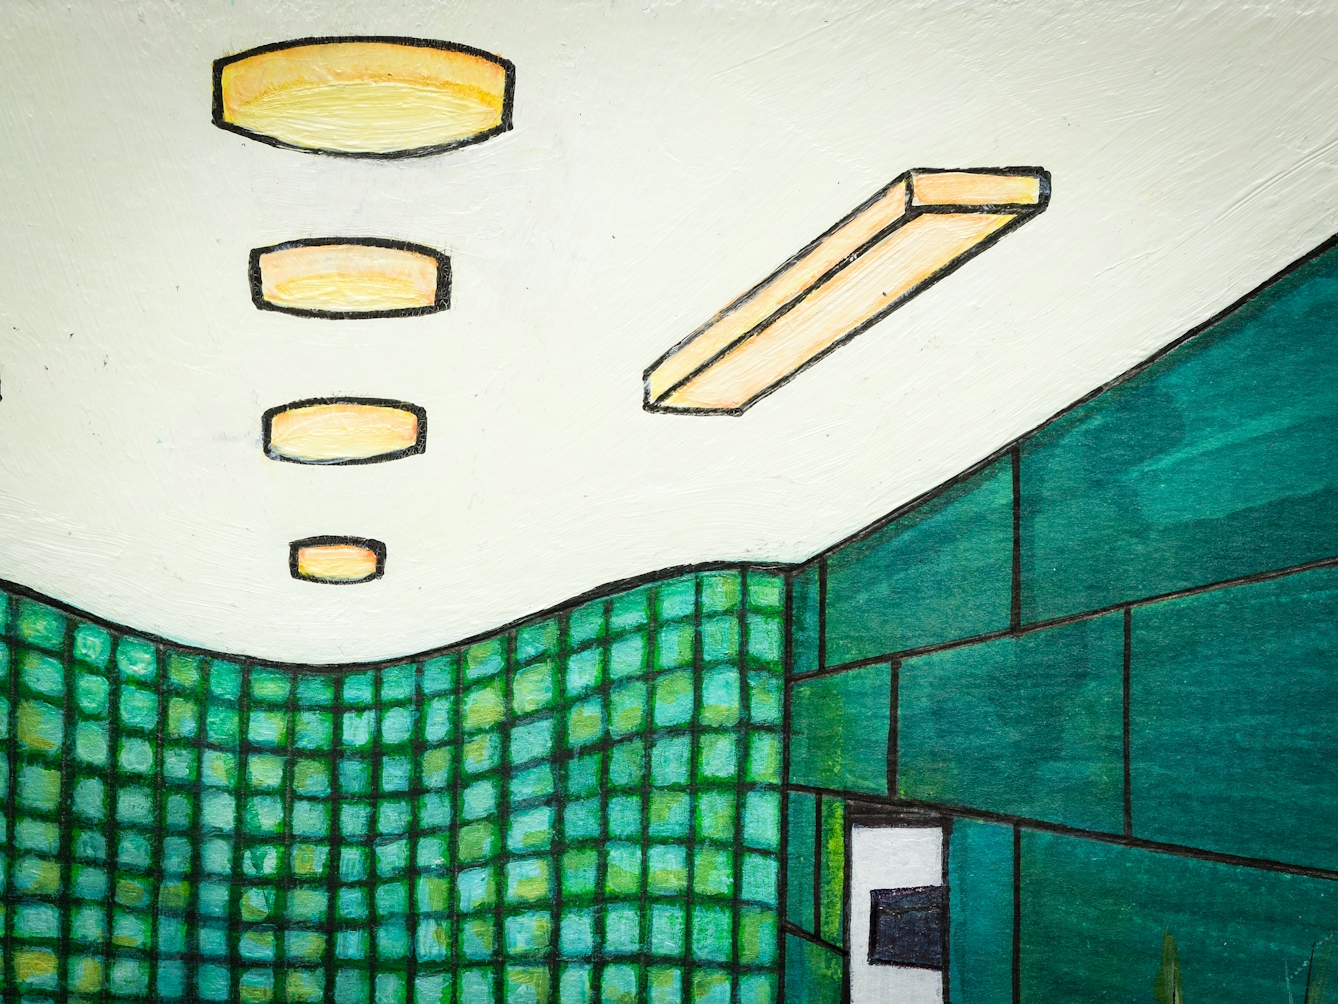 Detail from larger artwork made with paint and ink on textured watercolour paper. The artwork shows the decor of a hospital room with tiled walls and strip lighting.